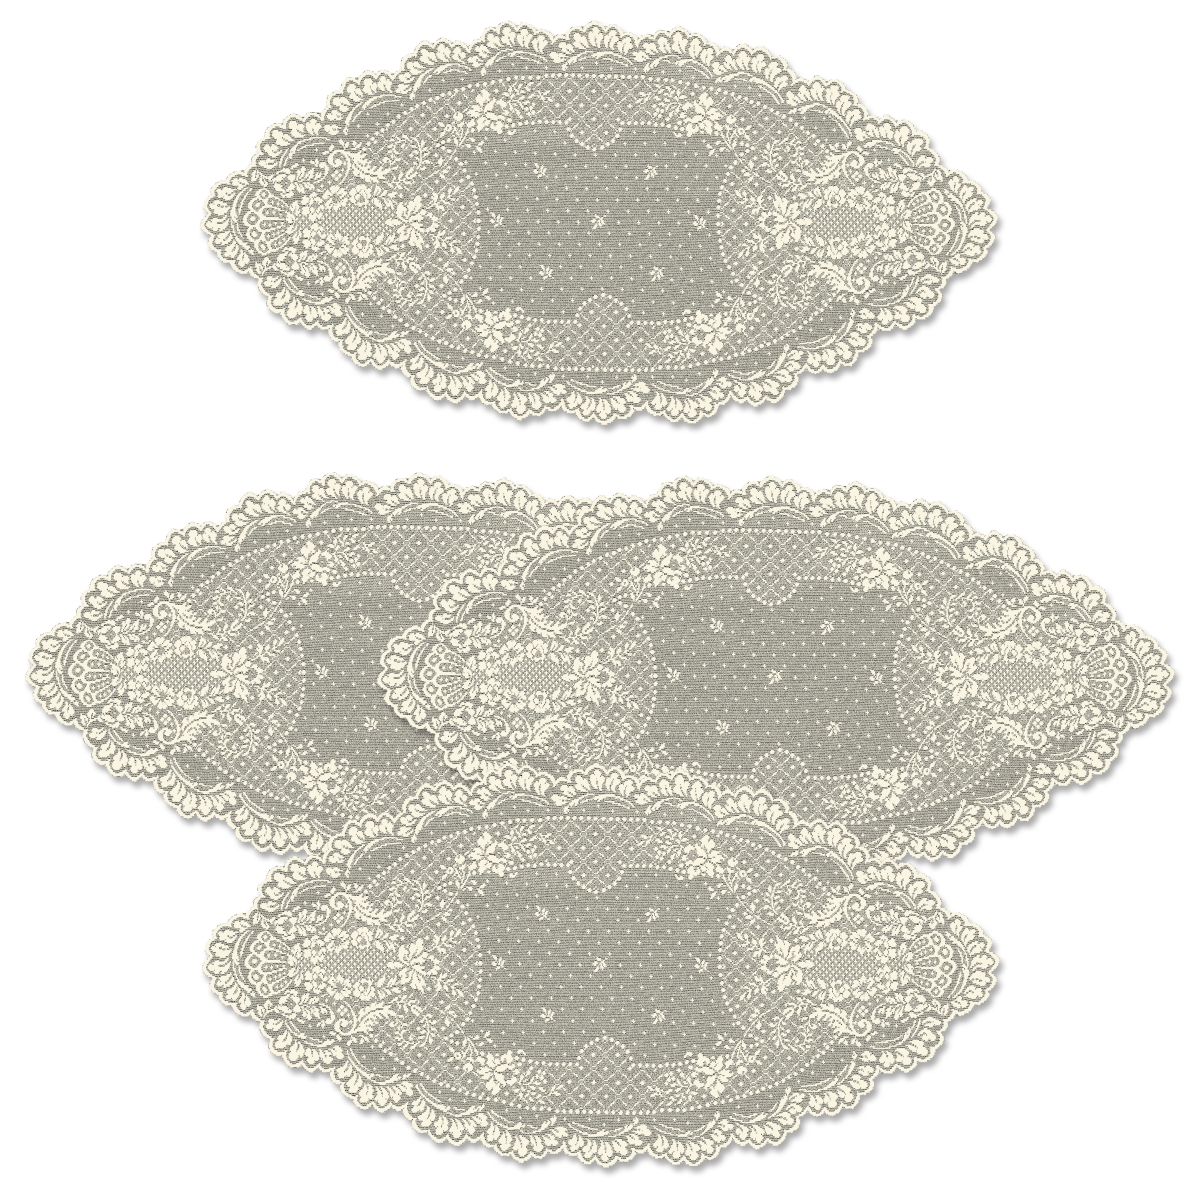 Picture of Heritage Lace FO-1428E-S 14 x 28 in. Floret Doily - Ecru - Set of 4